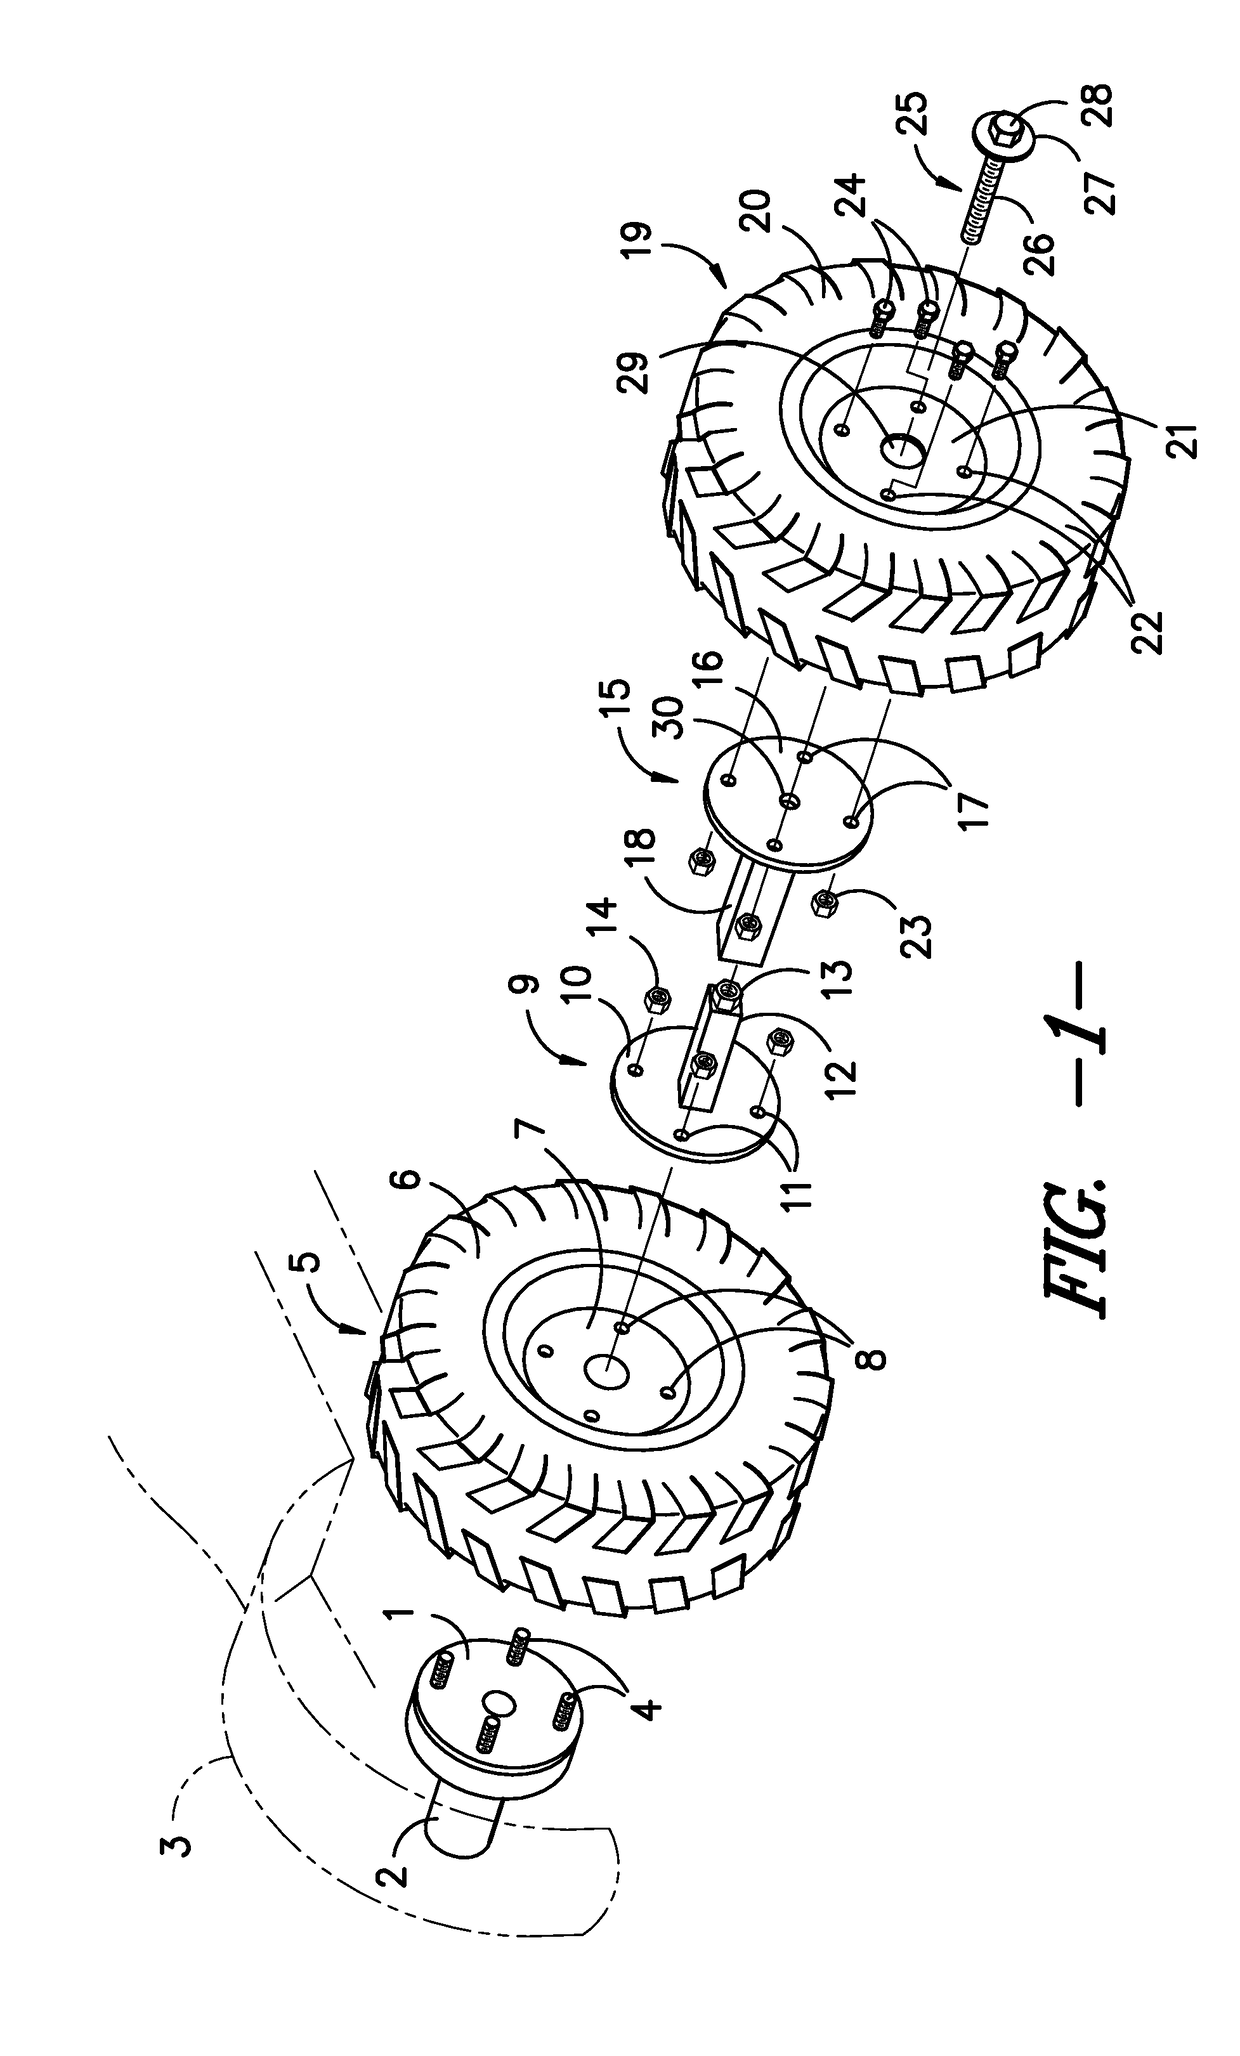 Adapter for dual-wheel vehicle